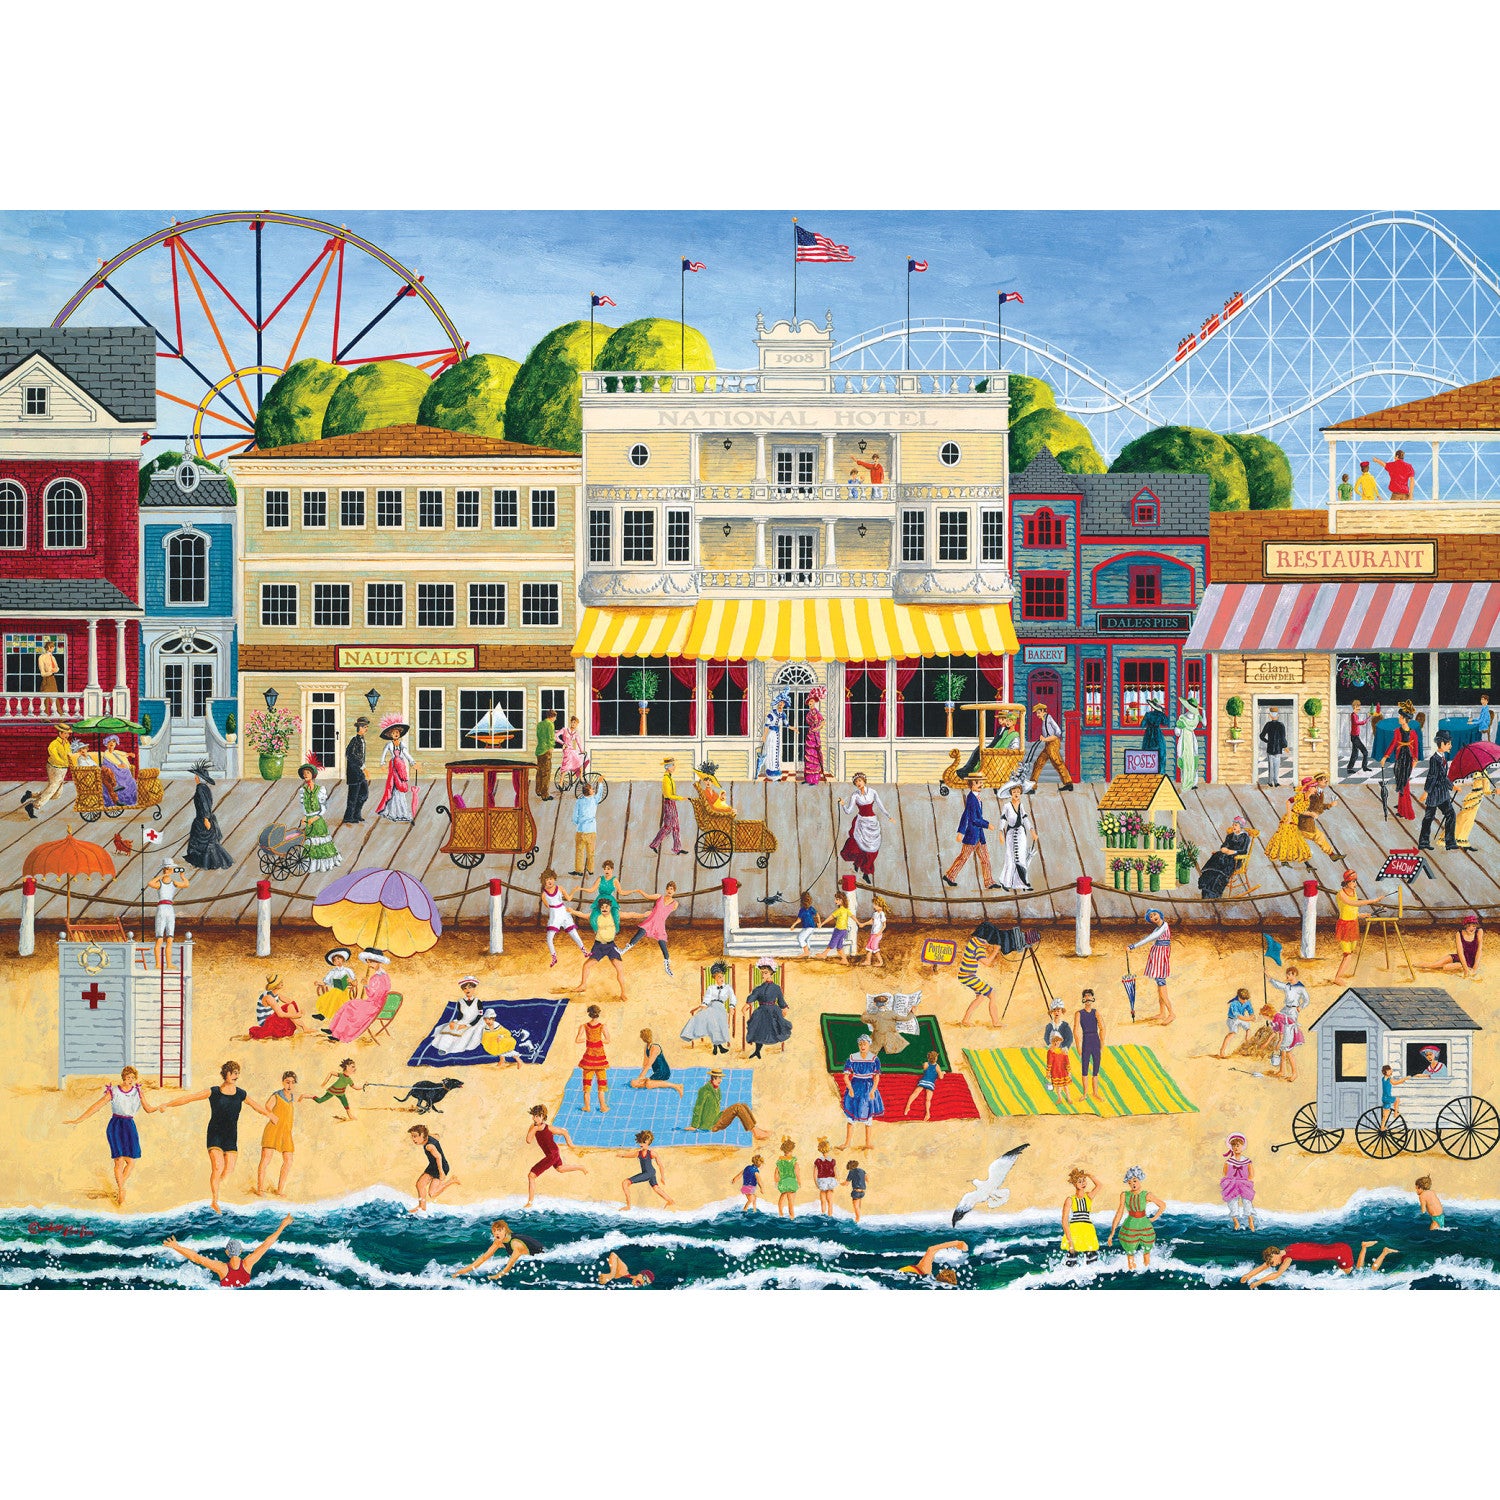 Hometown Gallery - On the Boardwalk 1000 Piece Puzzle